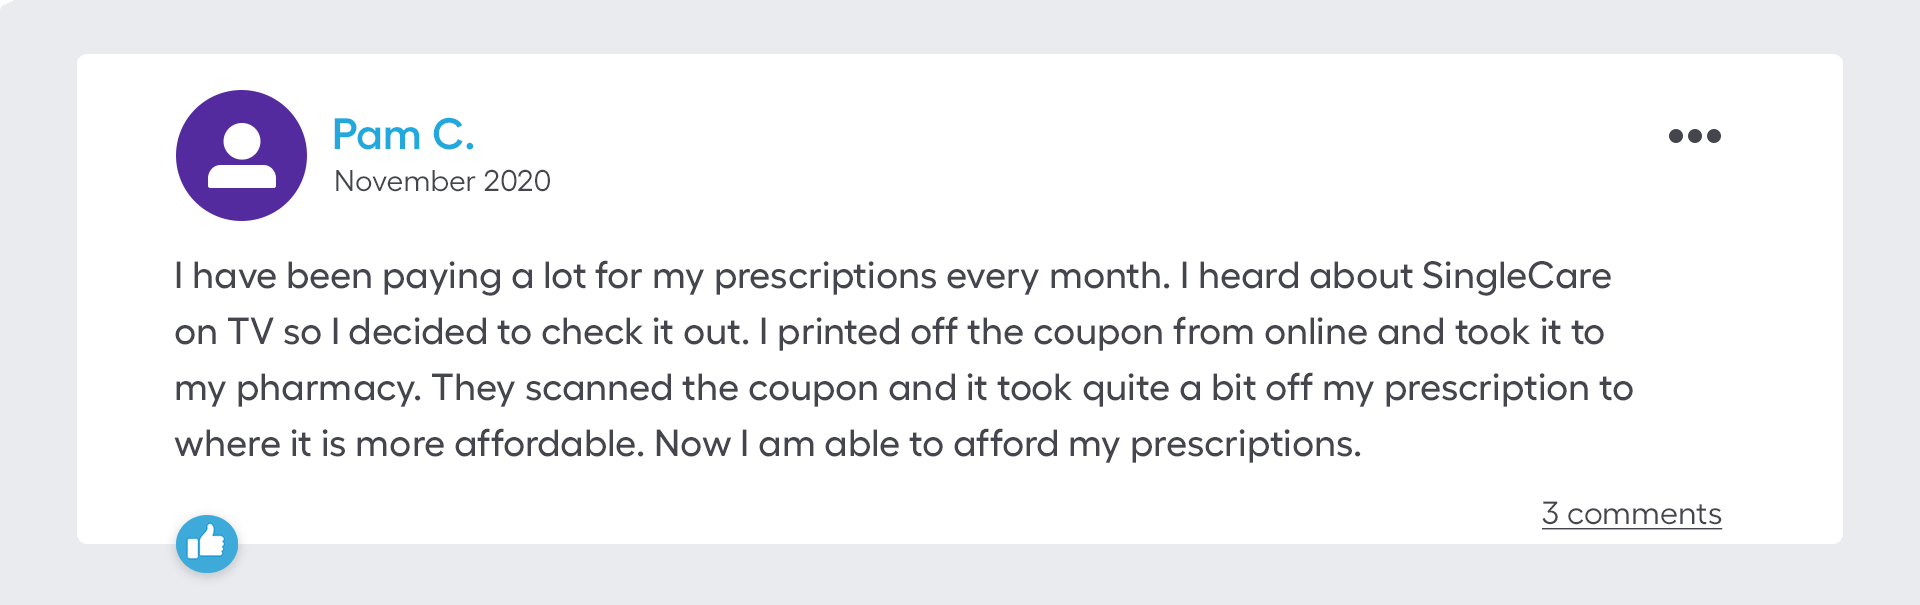 I have been paying a lot for my prescriptions every month. I heard about SingleCare on TV so I decided to check it out. I printed off the coupon from online and took it to my pharmacy. They scanned the coupon and it took quite a bit off my prescription to where it is more affordable. Now I am able to afford my prescriptions.